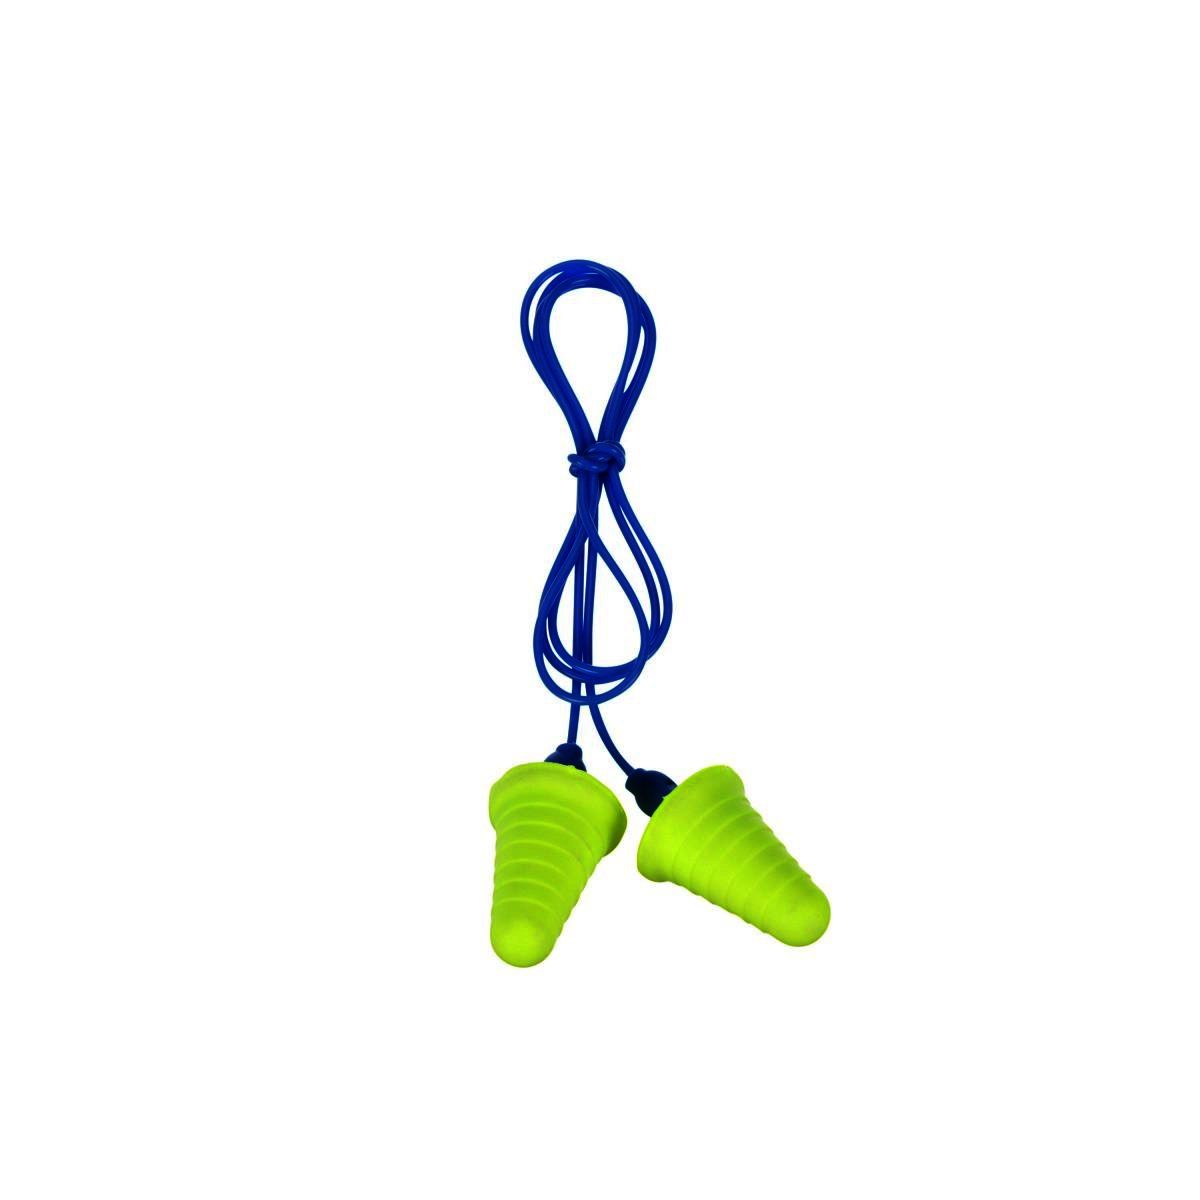 Airgas - 3MR318-1009 - 3M™ E-A-R™ Tapered Polyurethane Corded Earplugs